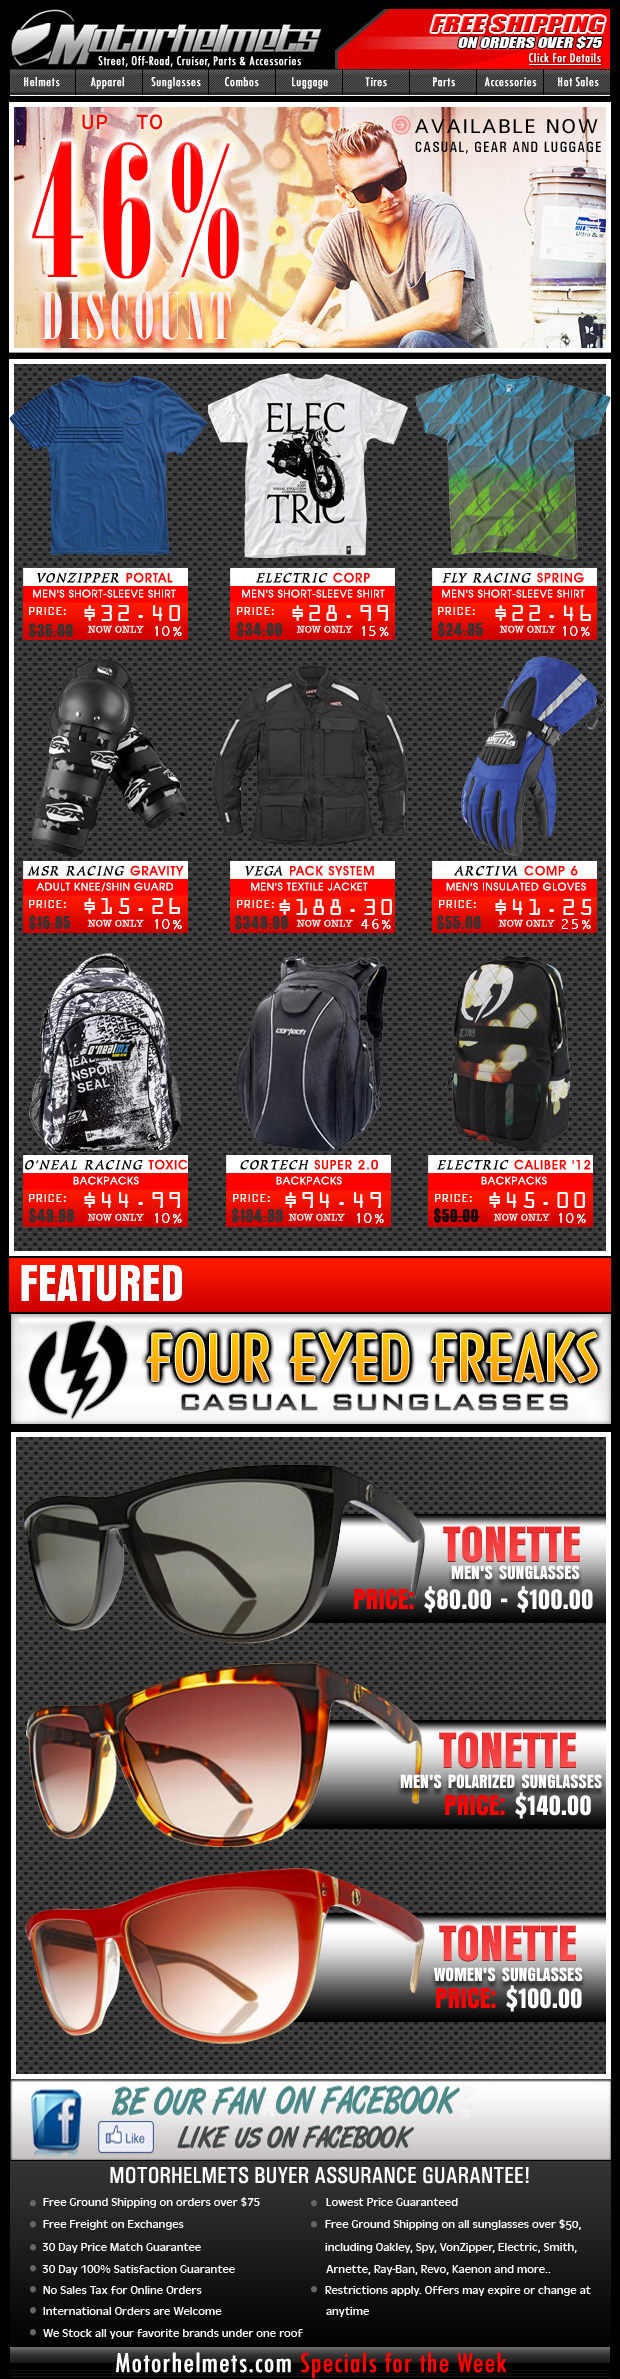 Save Up to 46% Off on Gear & Apparel from MSR, Fly, Vega, Electric and more!